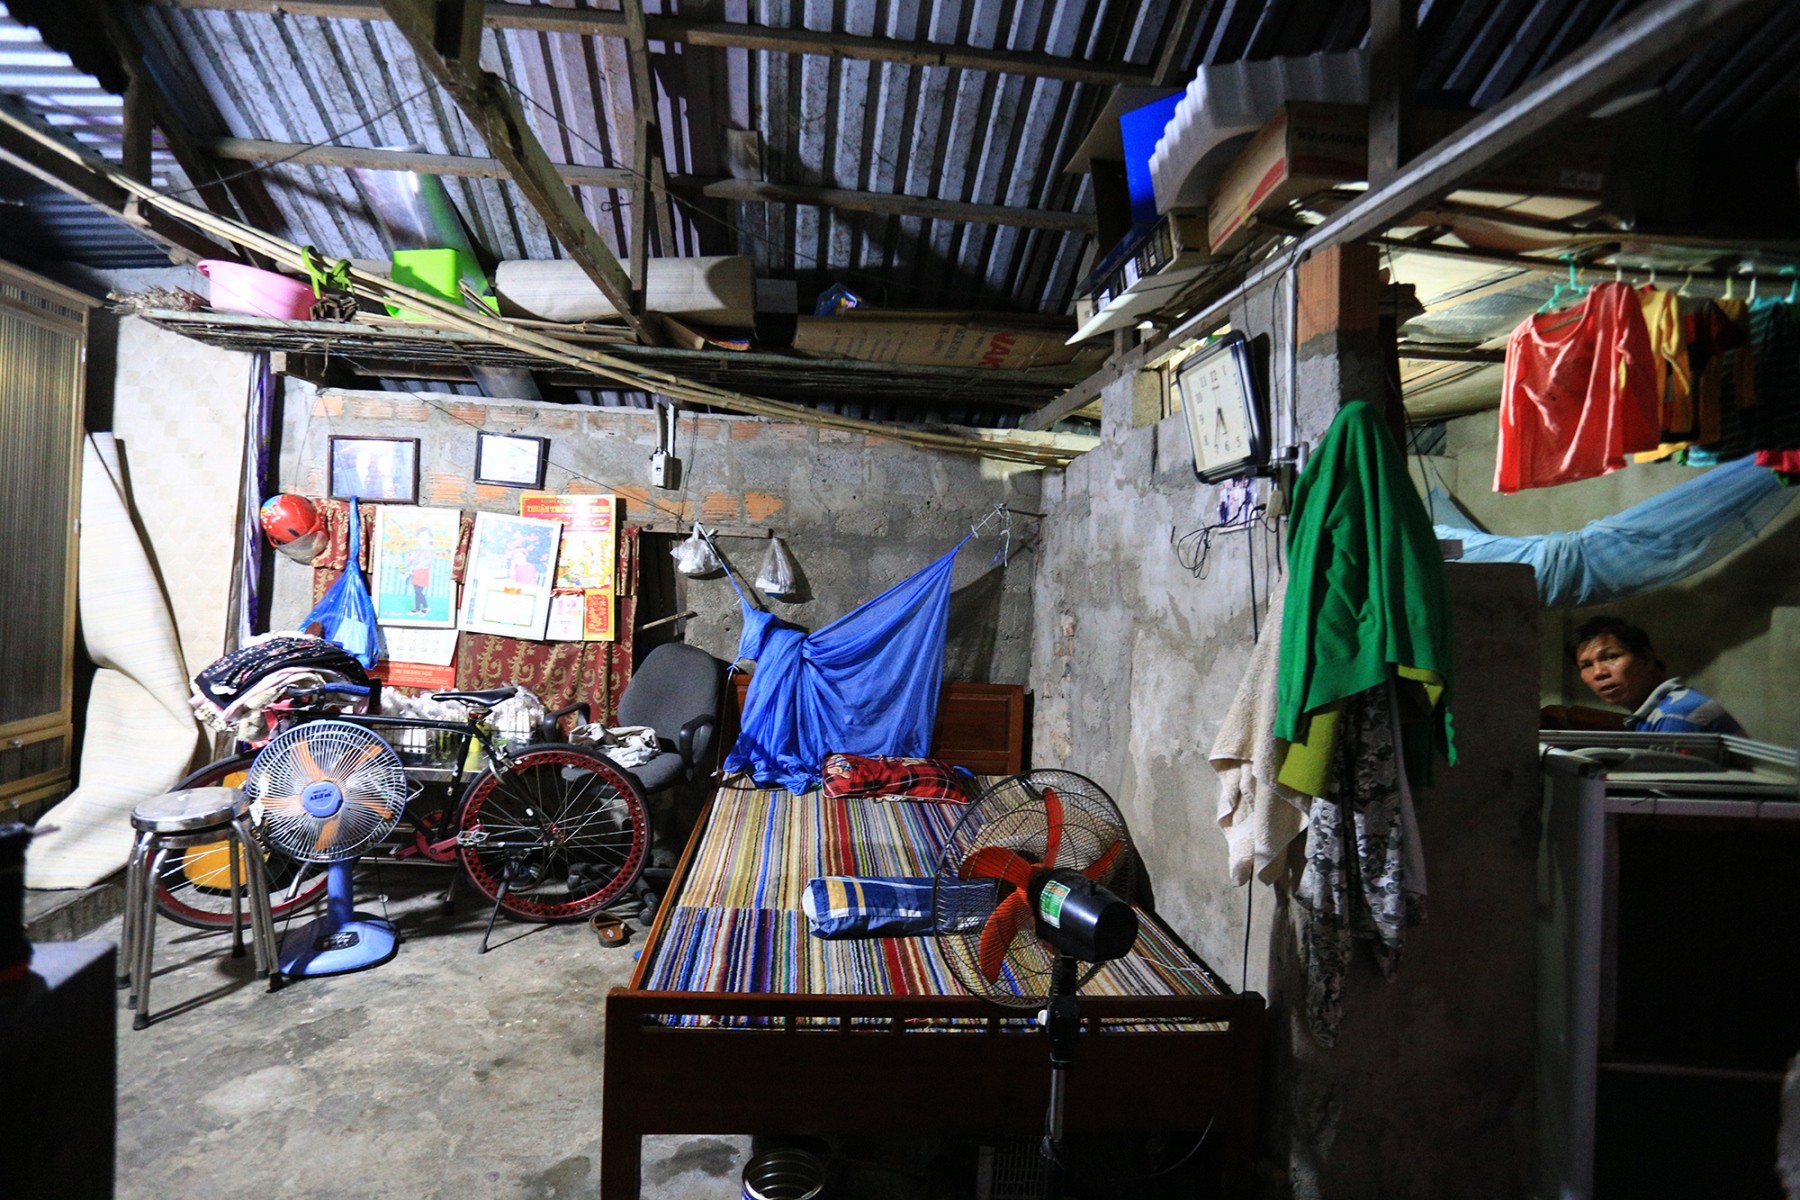 Inside a home in the Citadel of Hue. Photo: Tuoi Tre